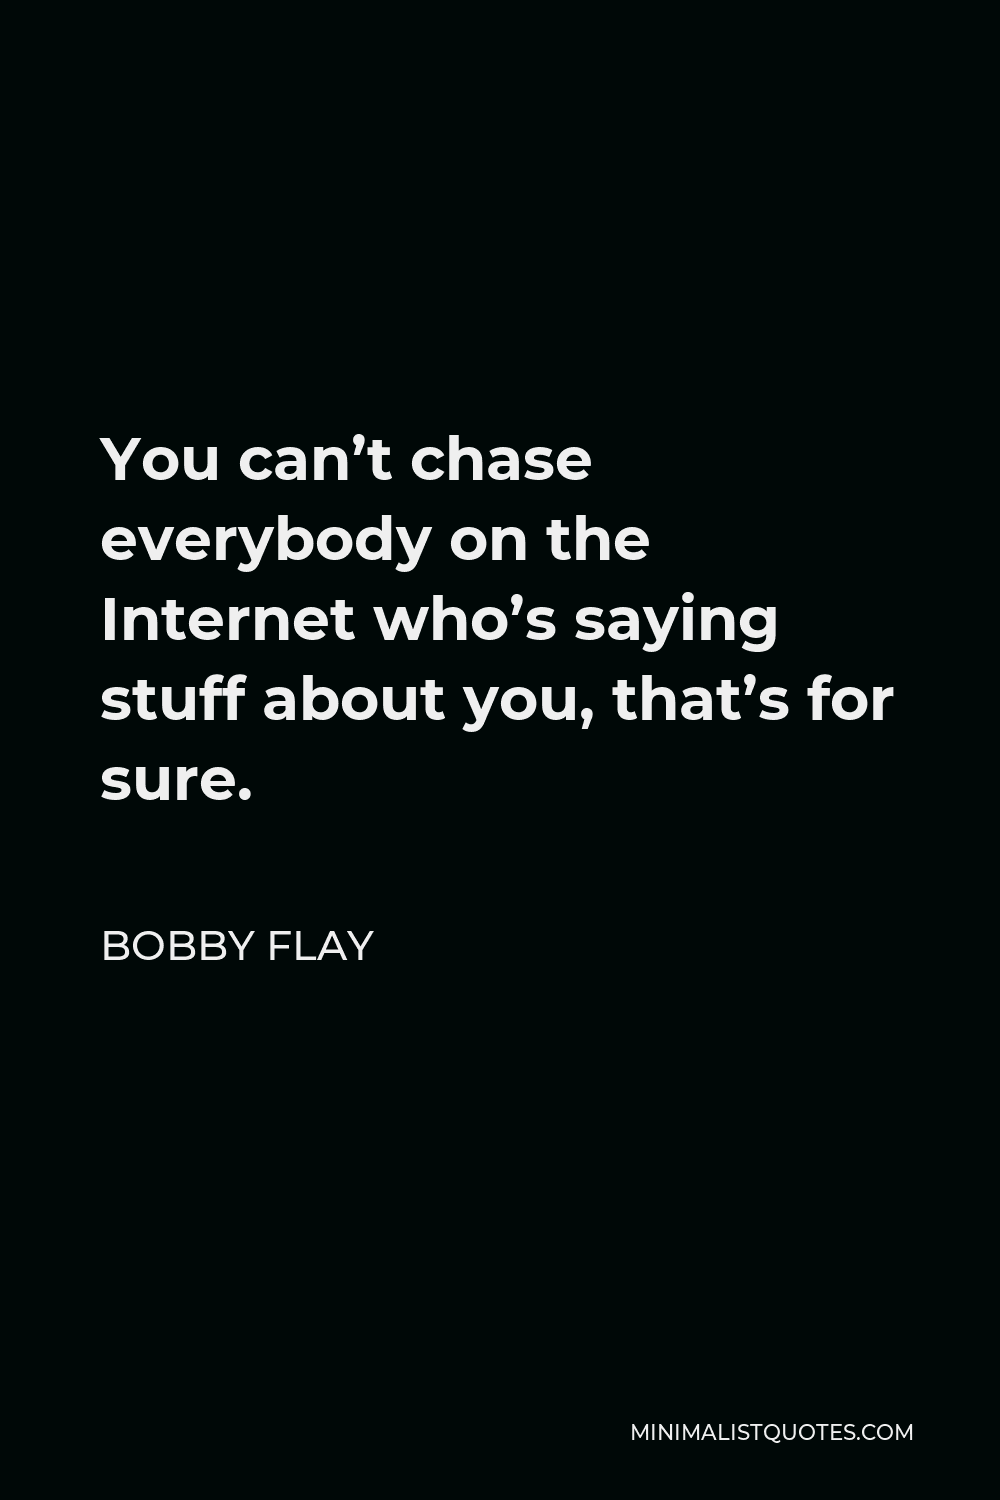 Bobby Flay Quote - You can’t chase everybody on the Internet who’s saying stuff about you, that’s for sure.